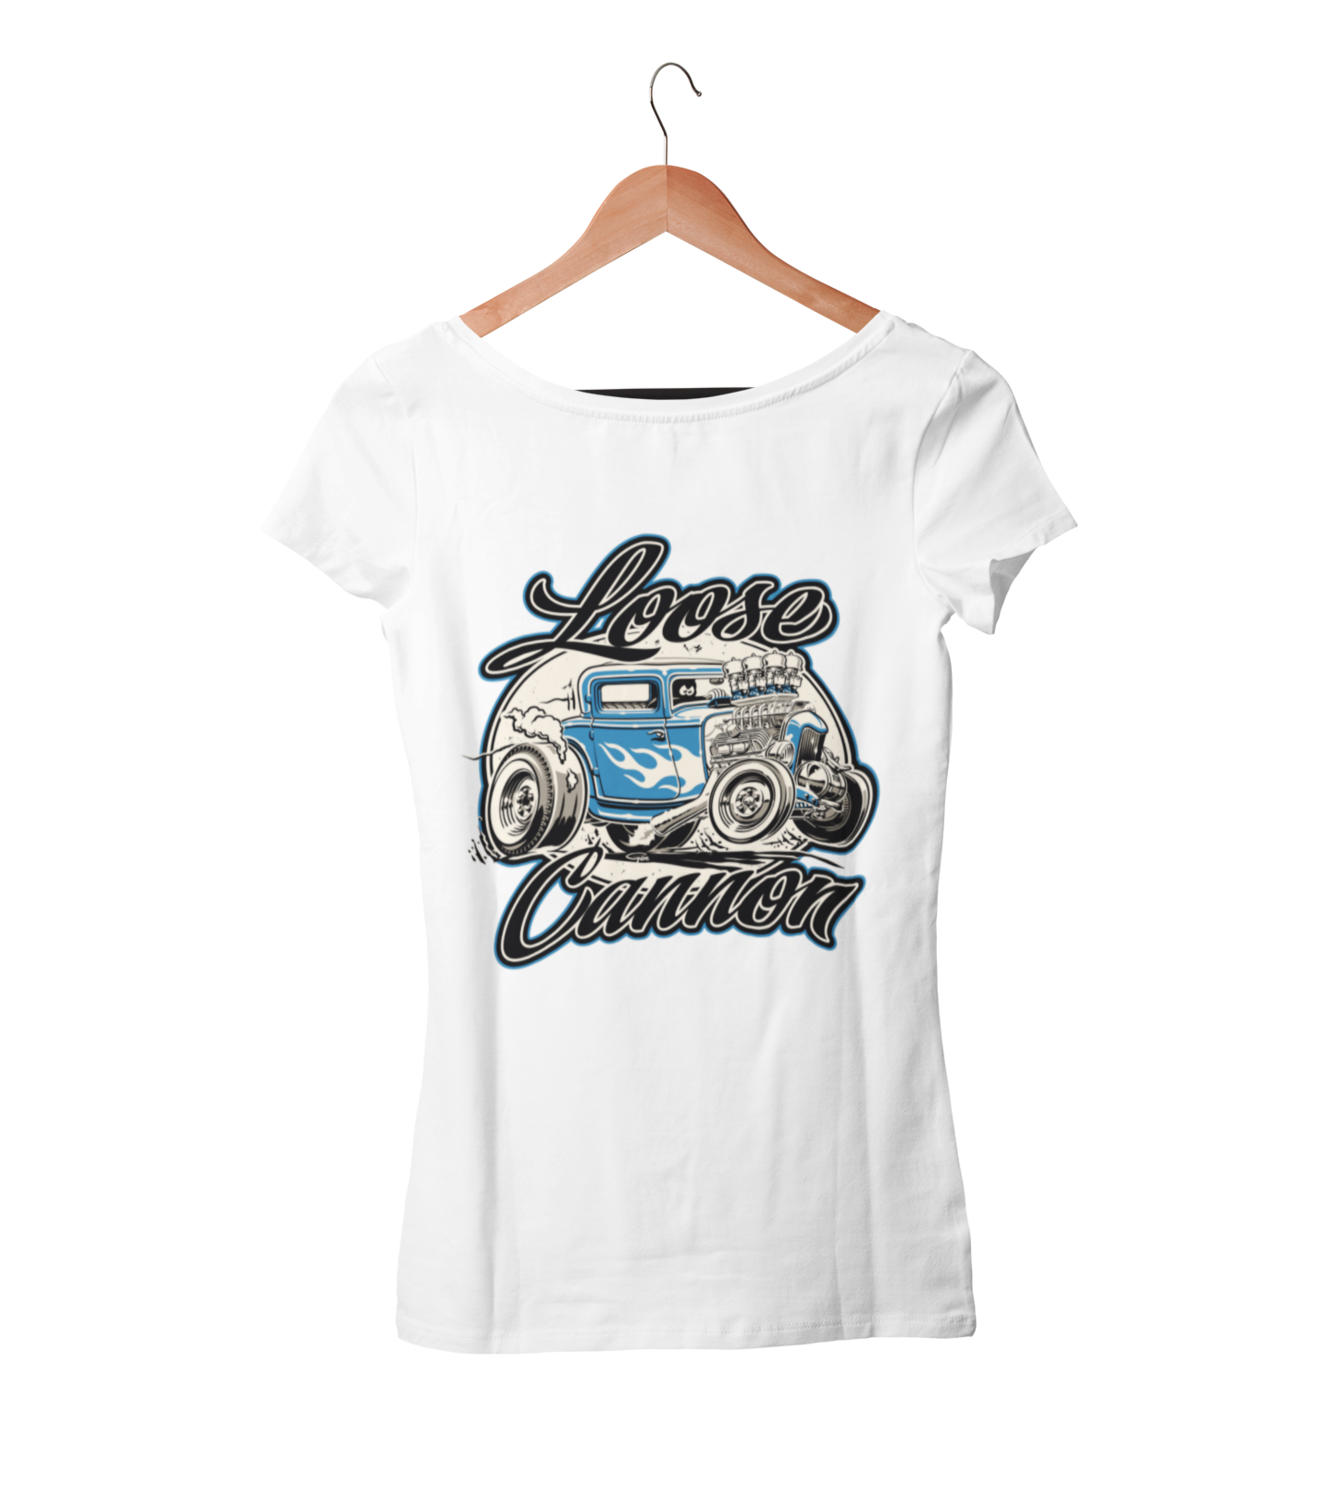 LOOSE CANNON T-SHIRT WOMAN by Ger "Dutch Courage" Peters artwork